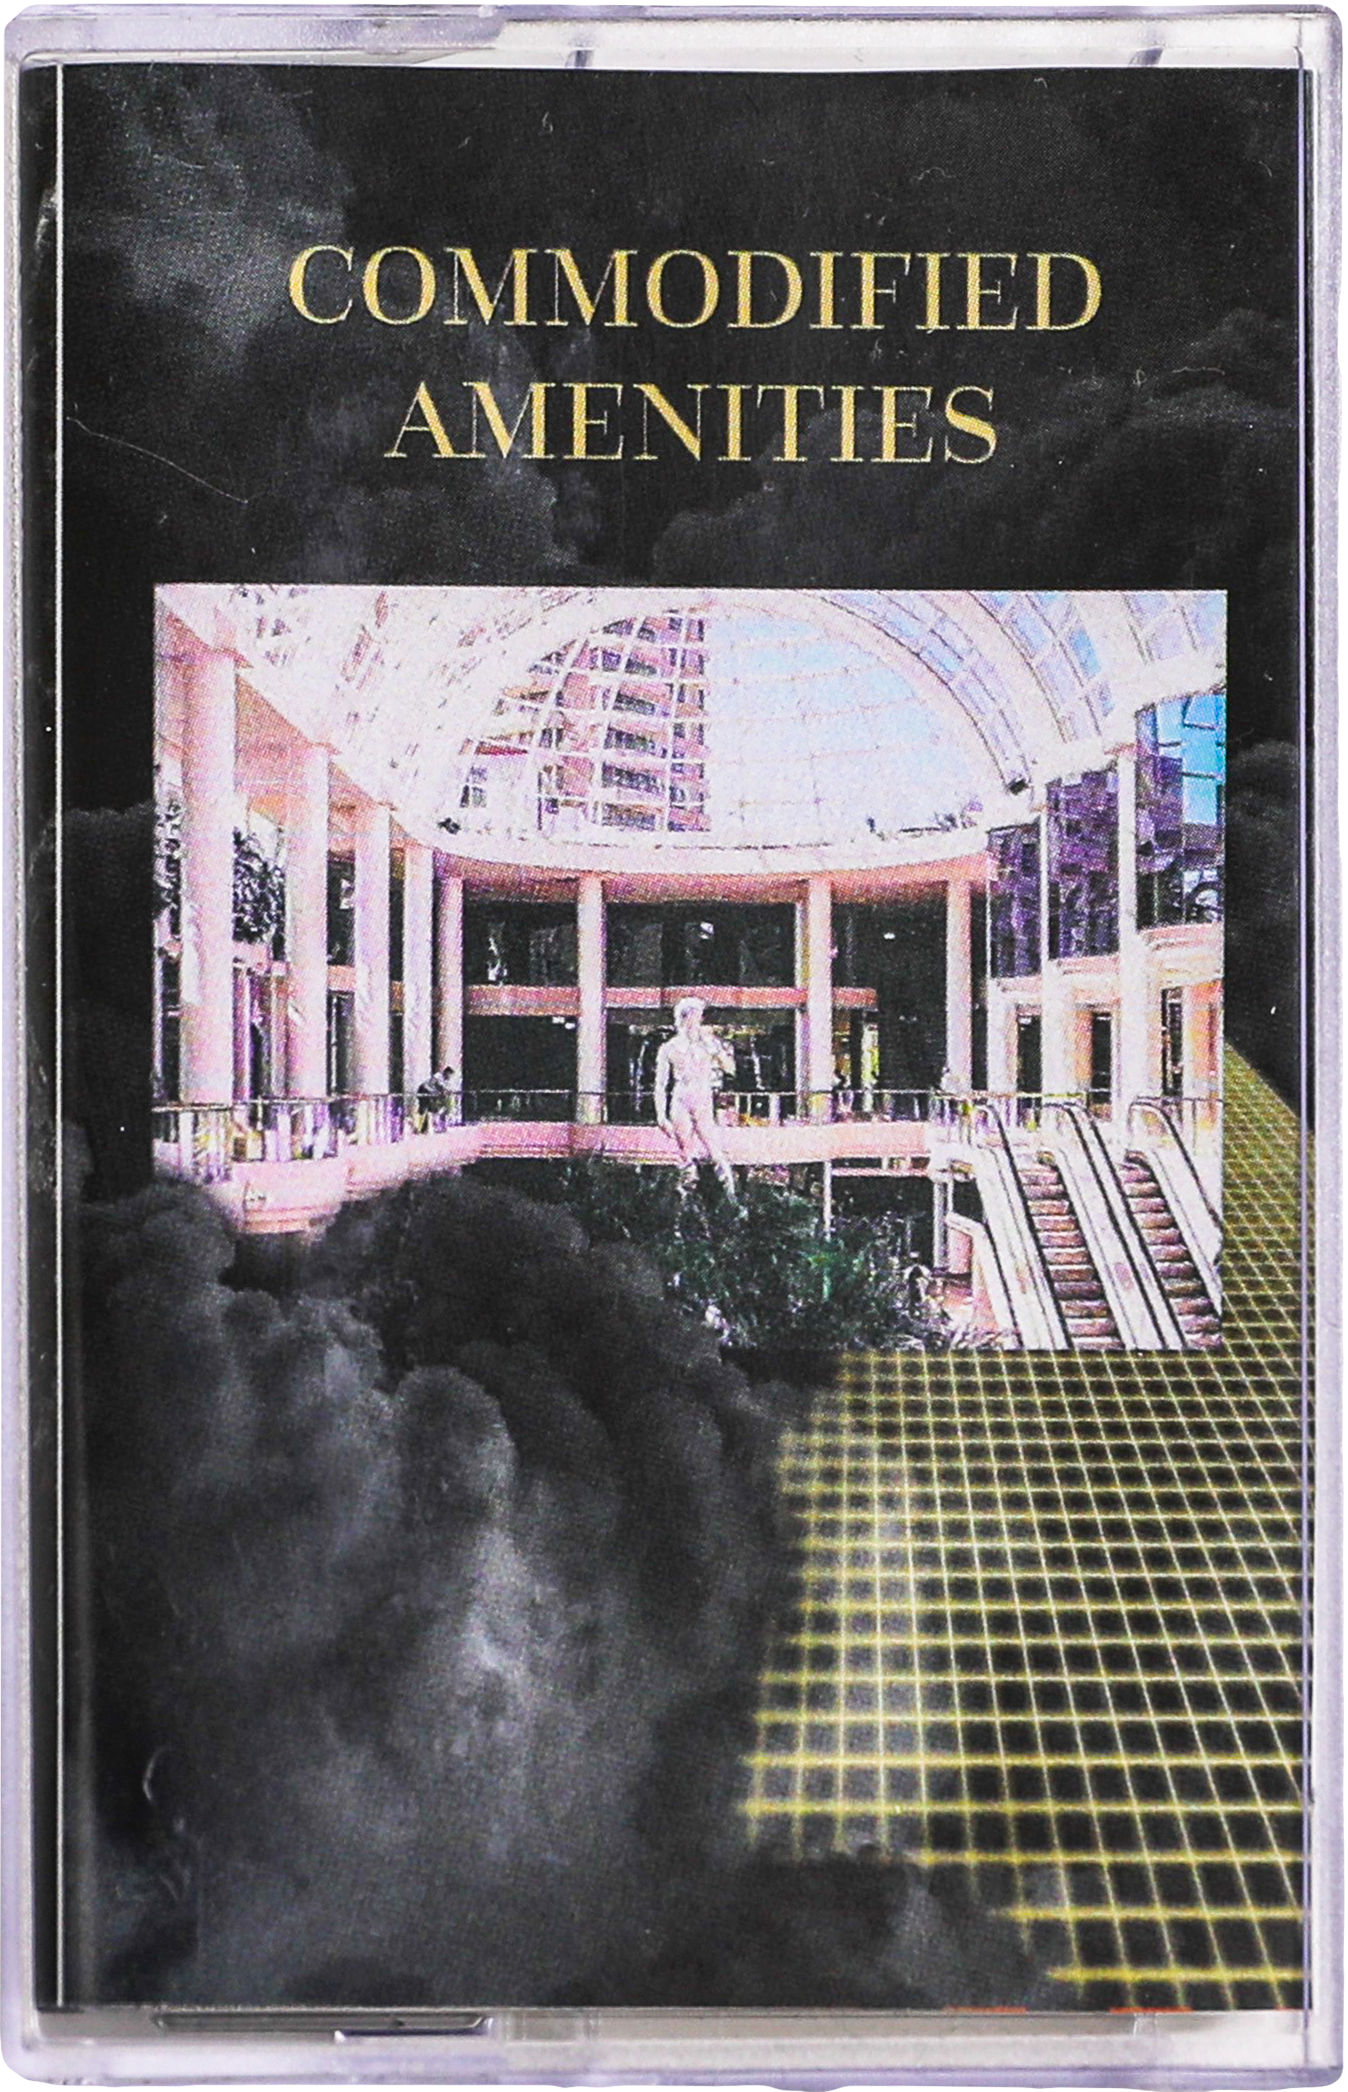 Commodified Amenities Tape tape Darknet Recordings 